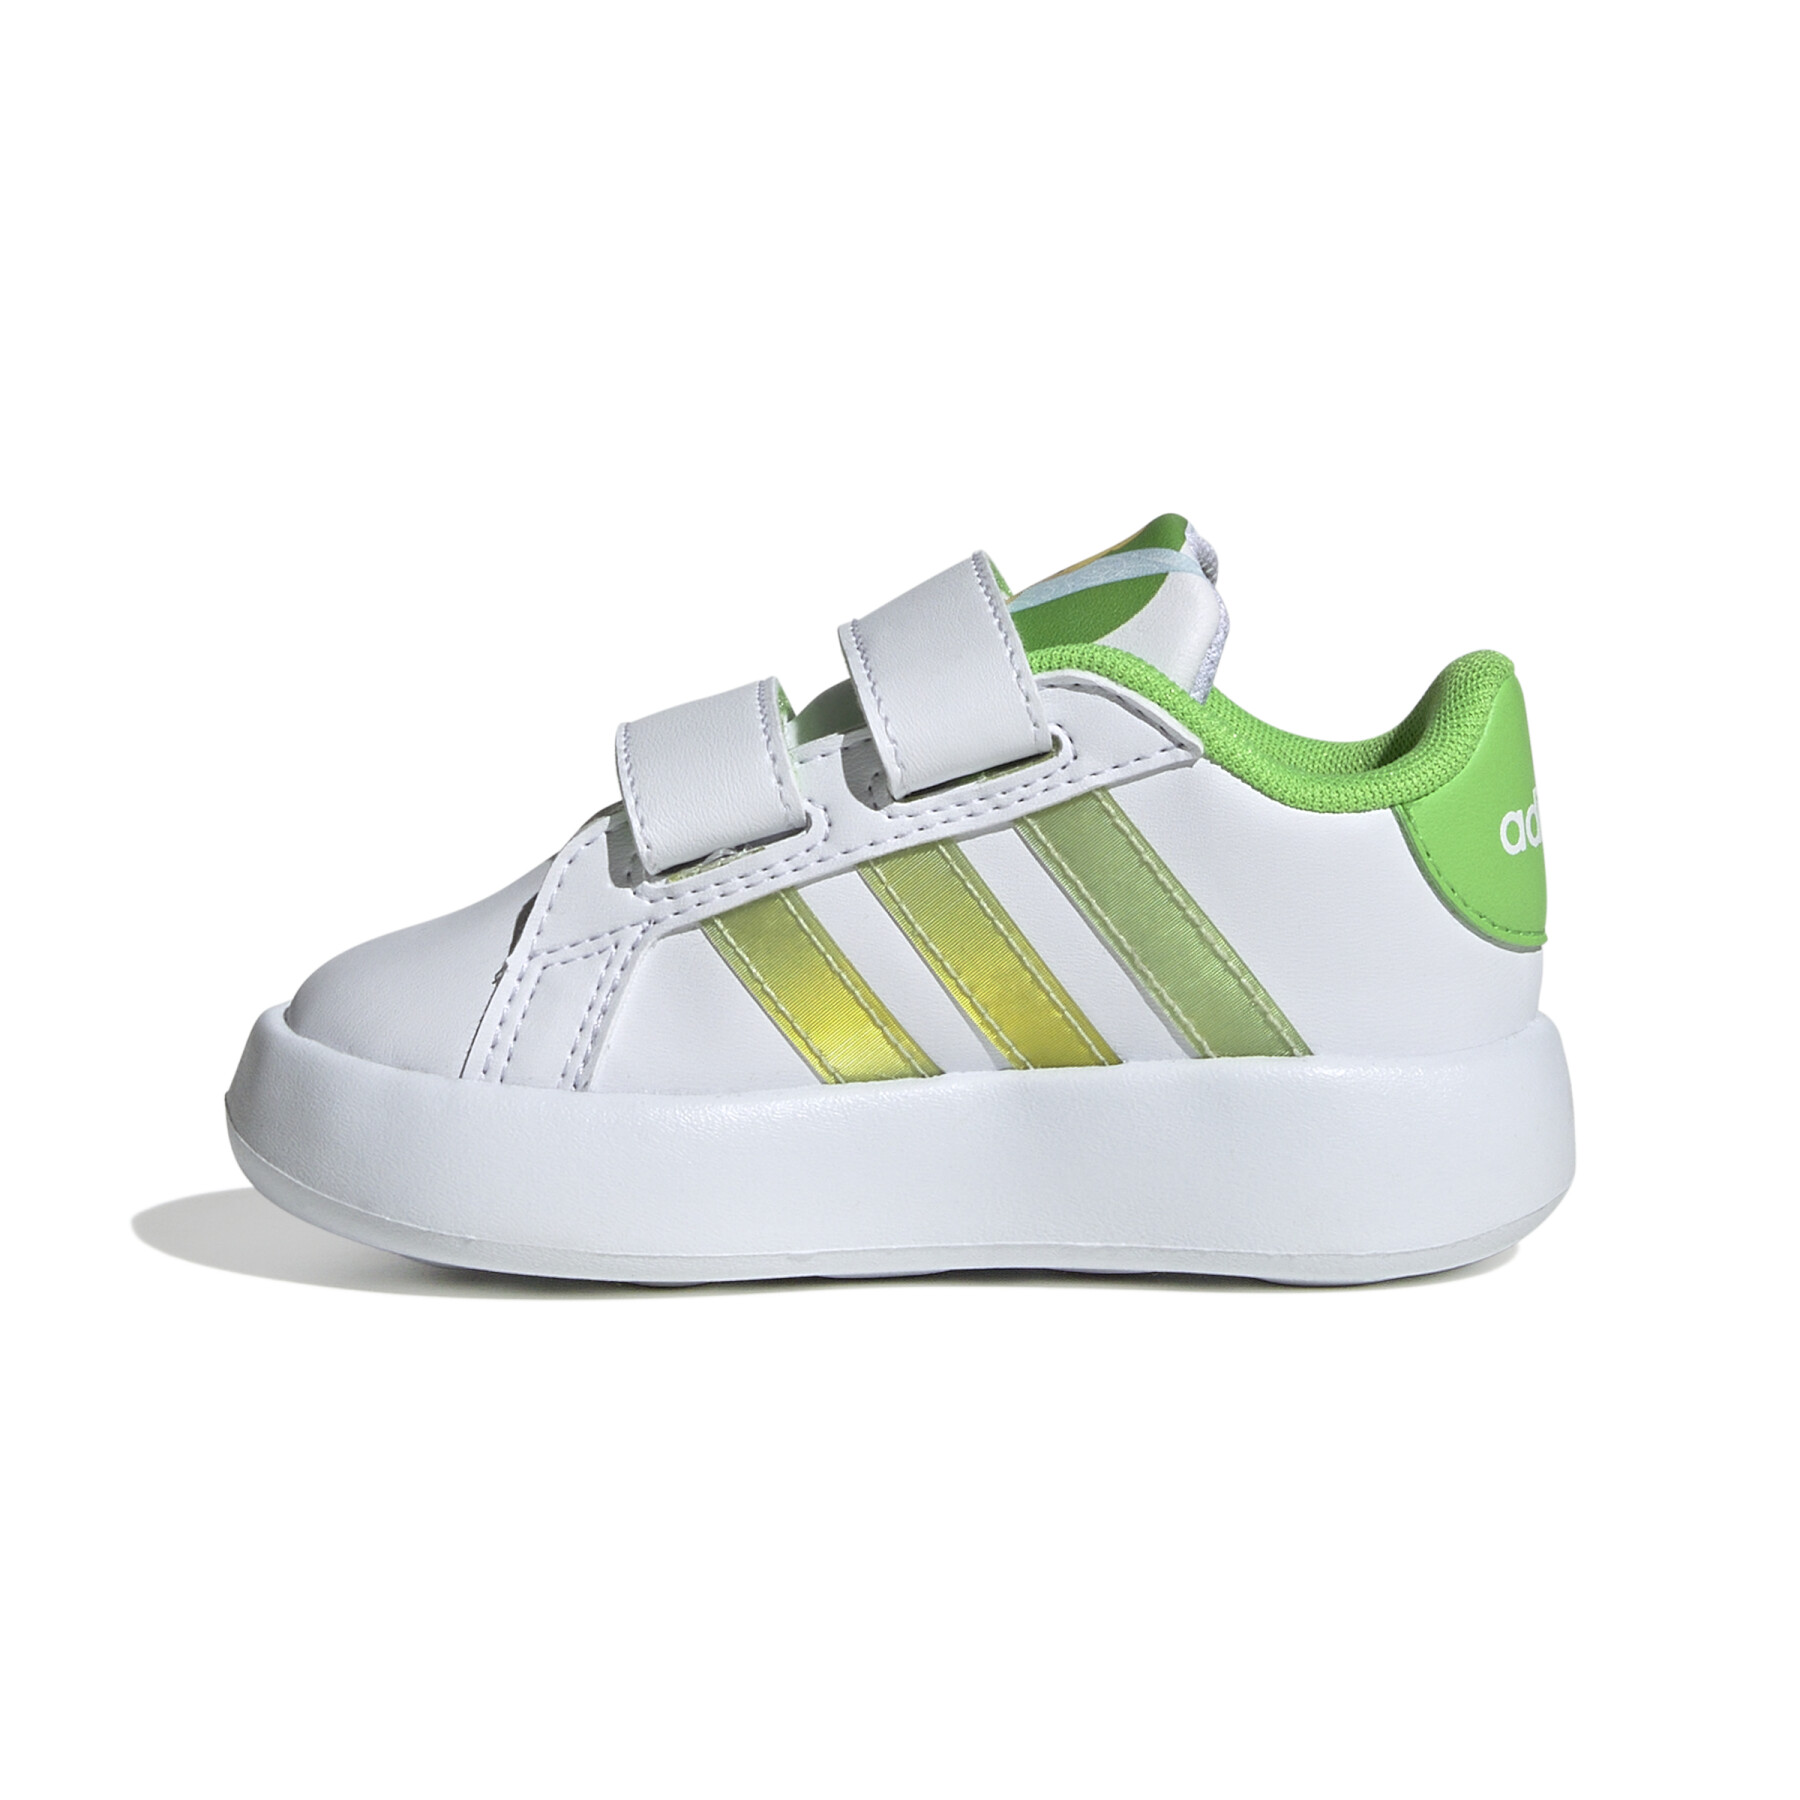 Babytrainers adidas Grand Court 2.0 Tink CF